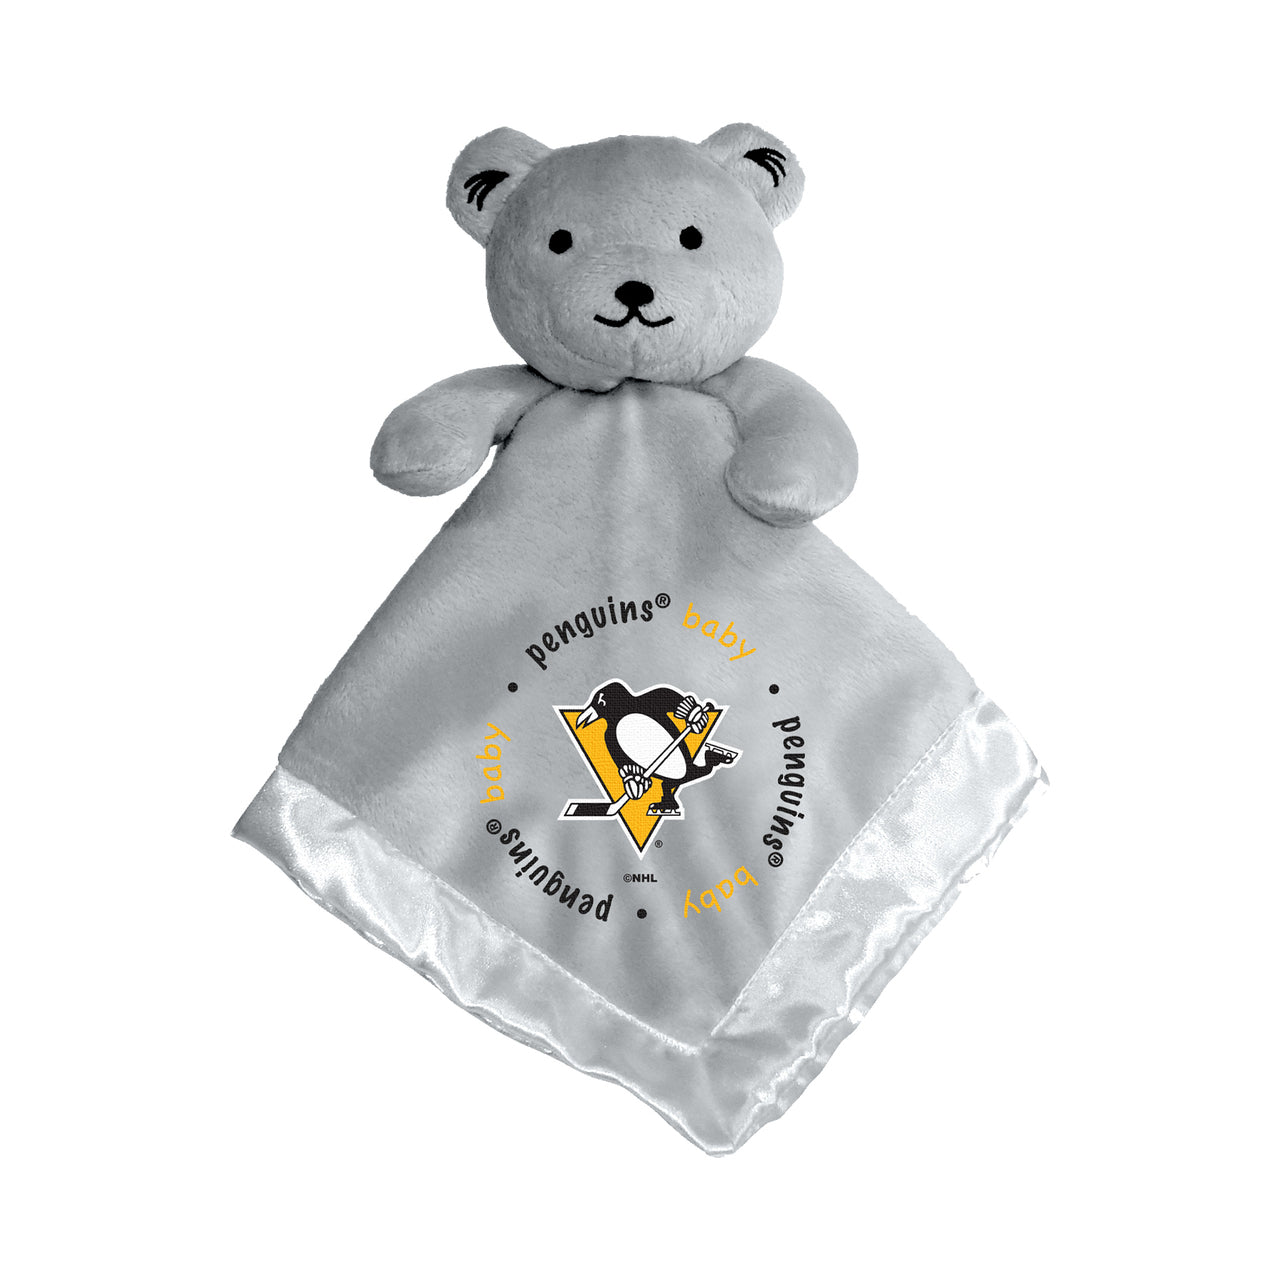 Pittsburgh Penguins Gray Embroidered Security Bear by Masterpieces